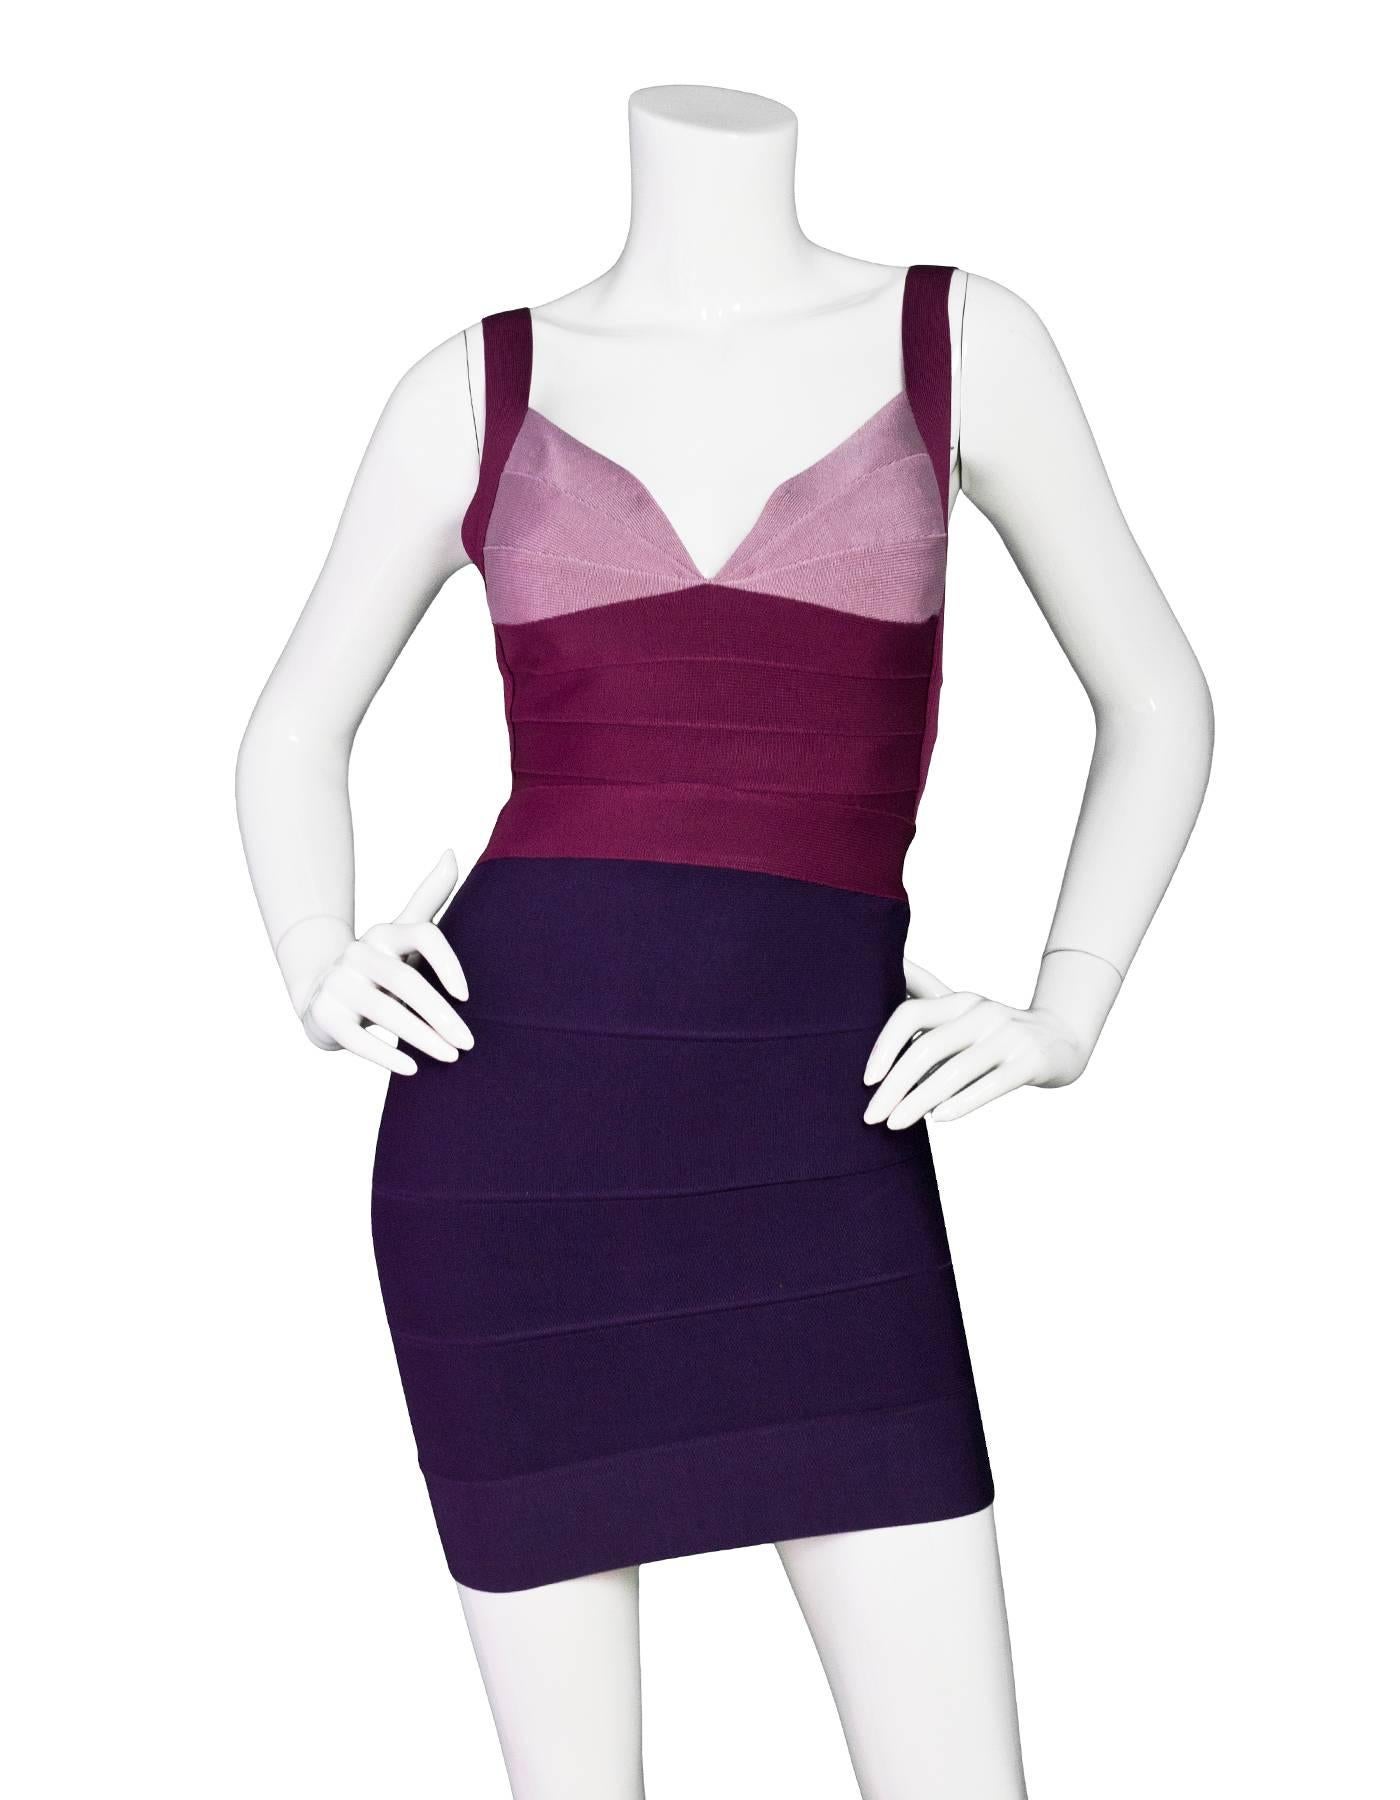 Herve Leger Purple Bandage Dress Sz S

Made In: China
Color: Purple
Composition: 90% Rayon, 9% Nylon, 1% Spandex
Lining: None
Closure/Opening: Zip closure at back
Overall Conditon: Very good pre-owned condition with the exception of altered shoulder